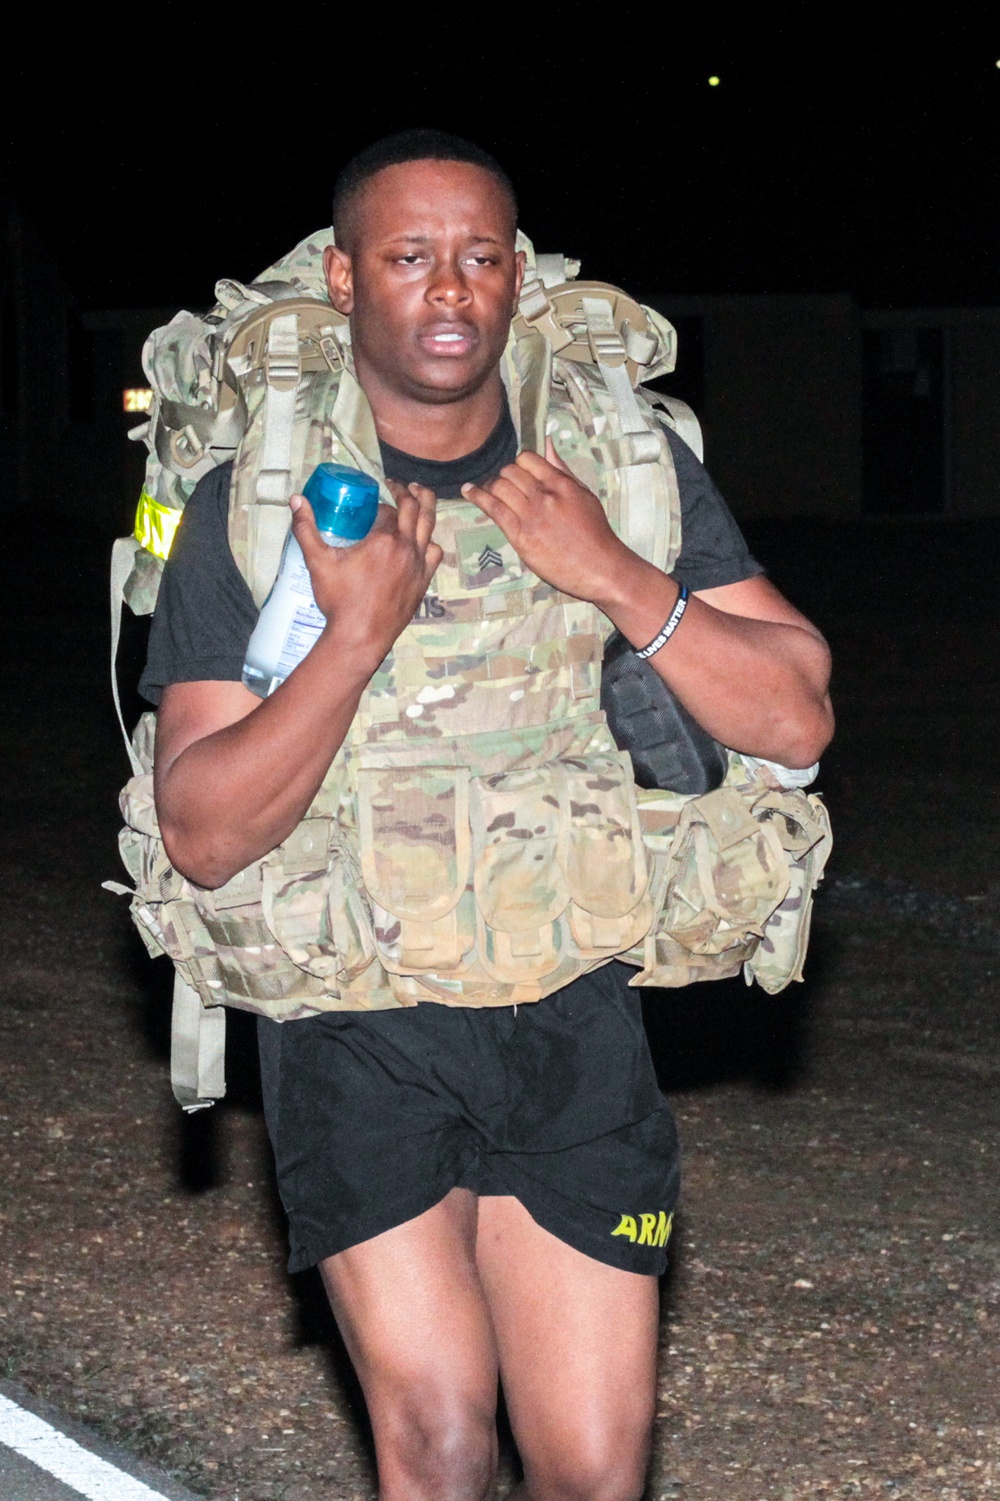 Ruck March - 155 ABCT